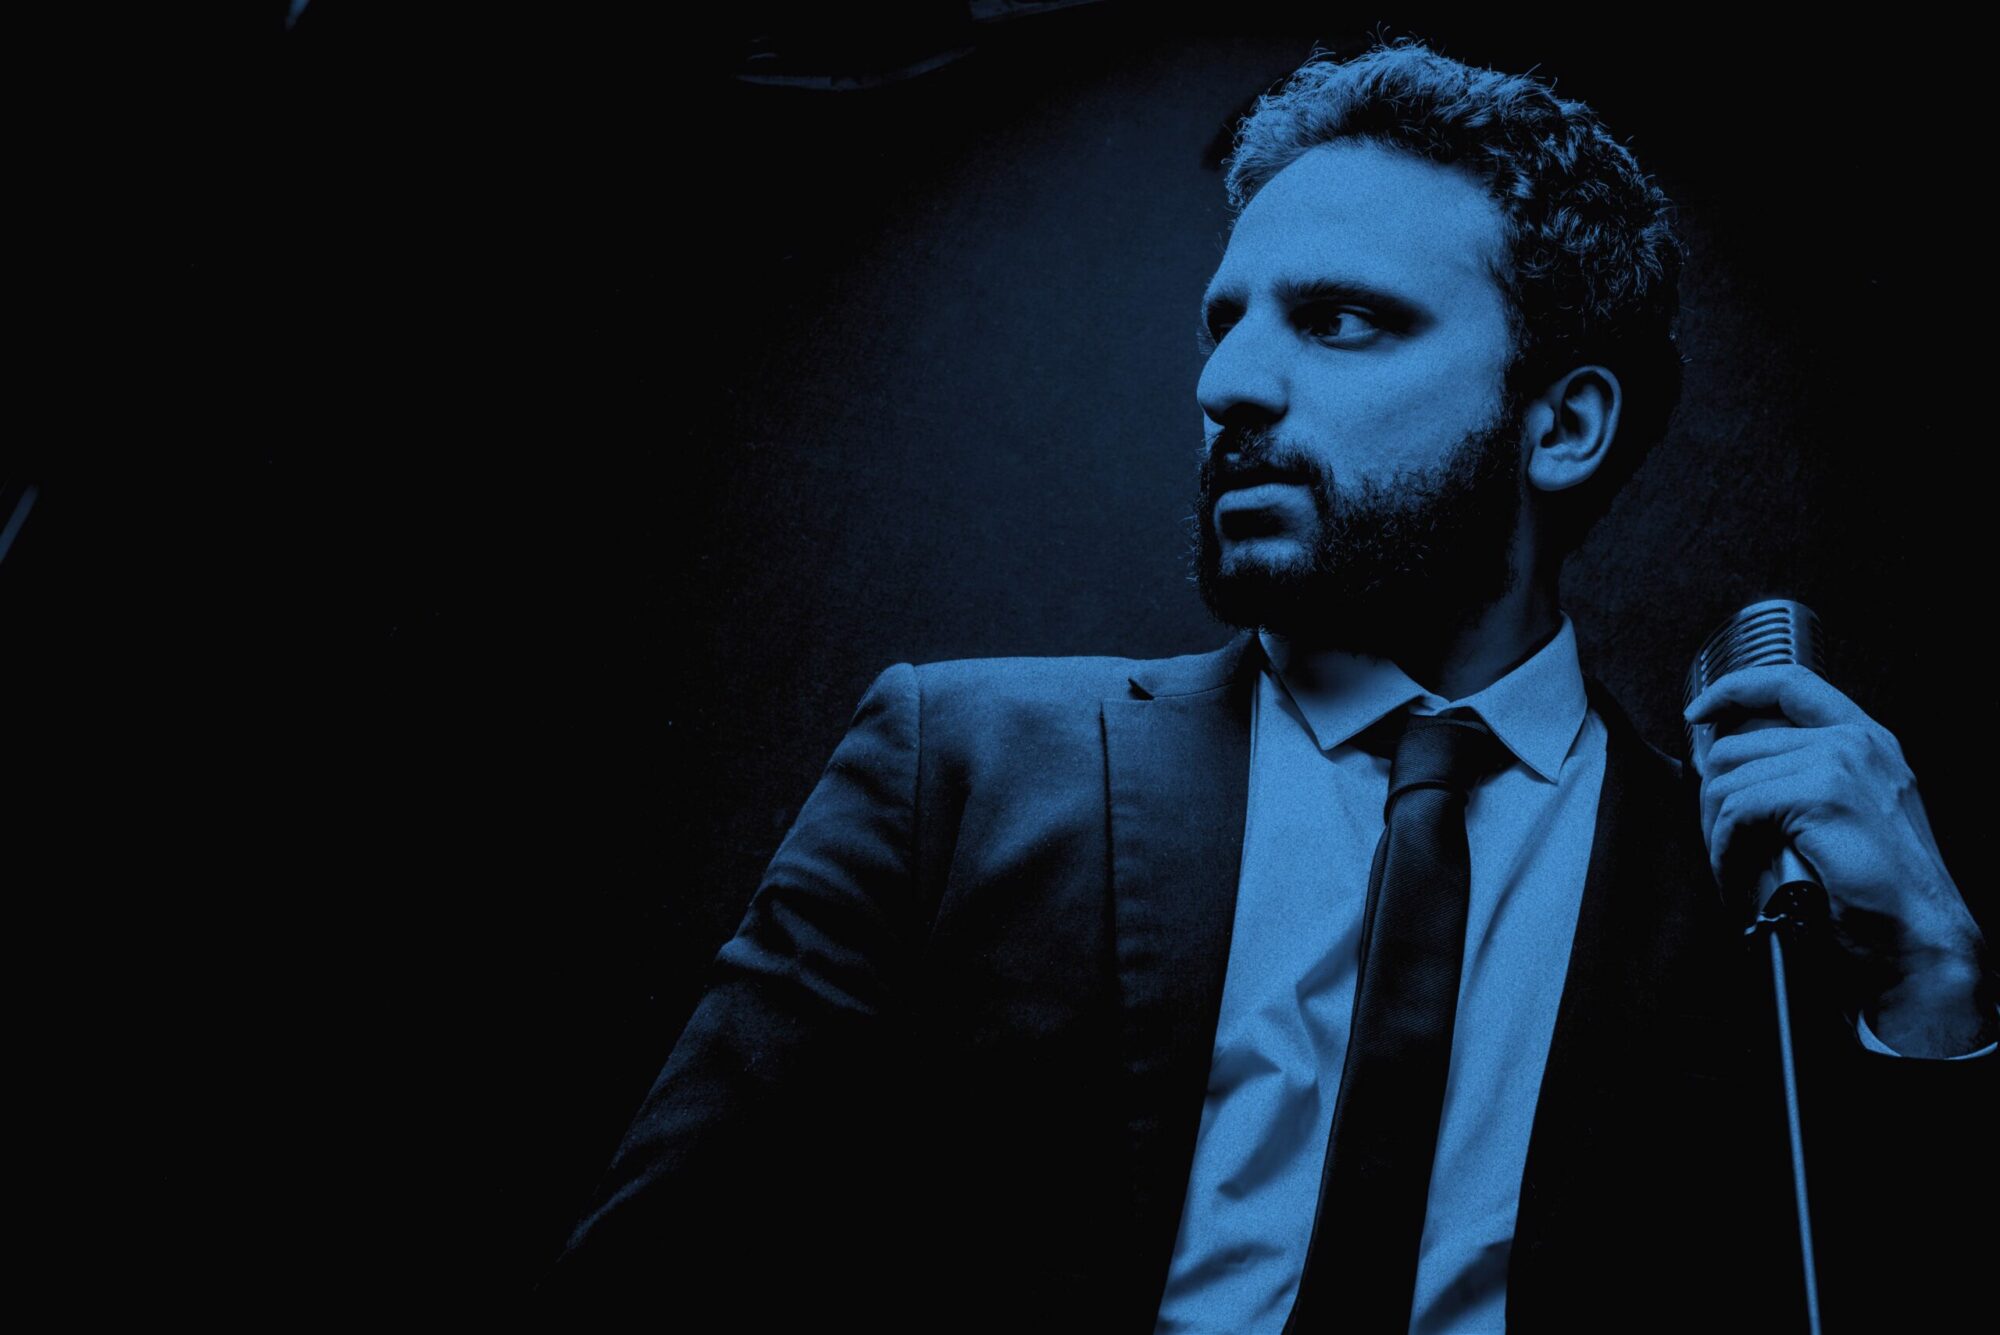 Image name Nish Kumar at Leadmill Sheffield scaled the 28 image from the post Nish Kumar: Nish, Don't Kill My Vibe at Scarborough Spa Theatre, Scarborough in Yorkshire.com.